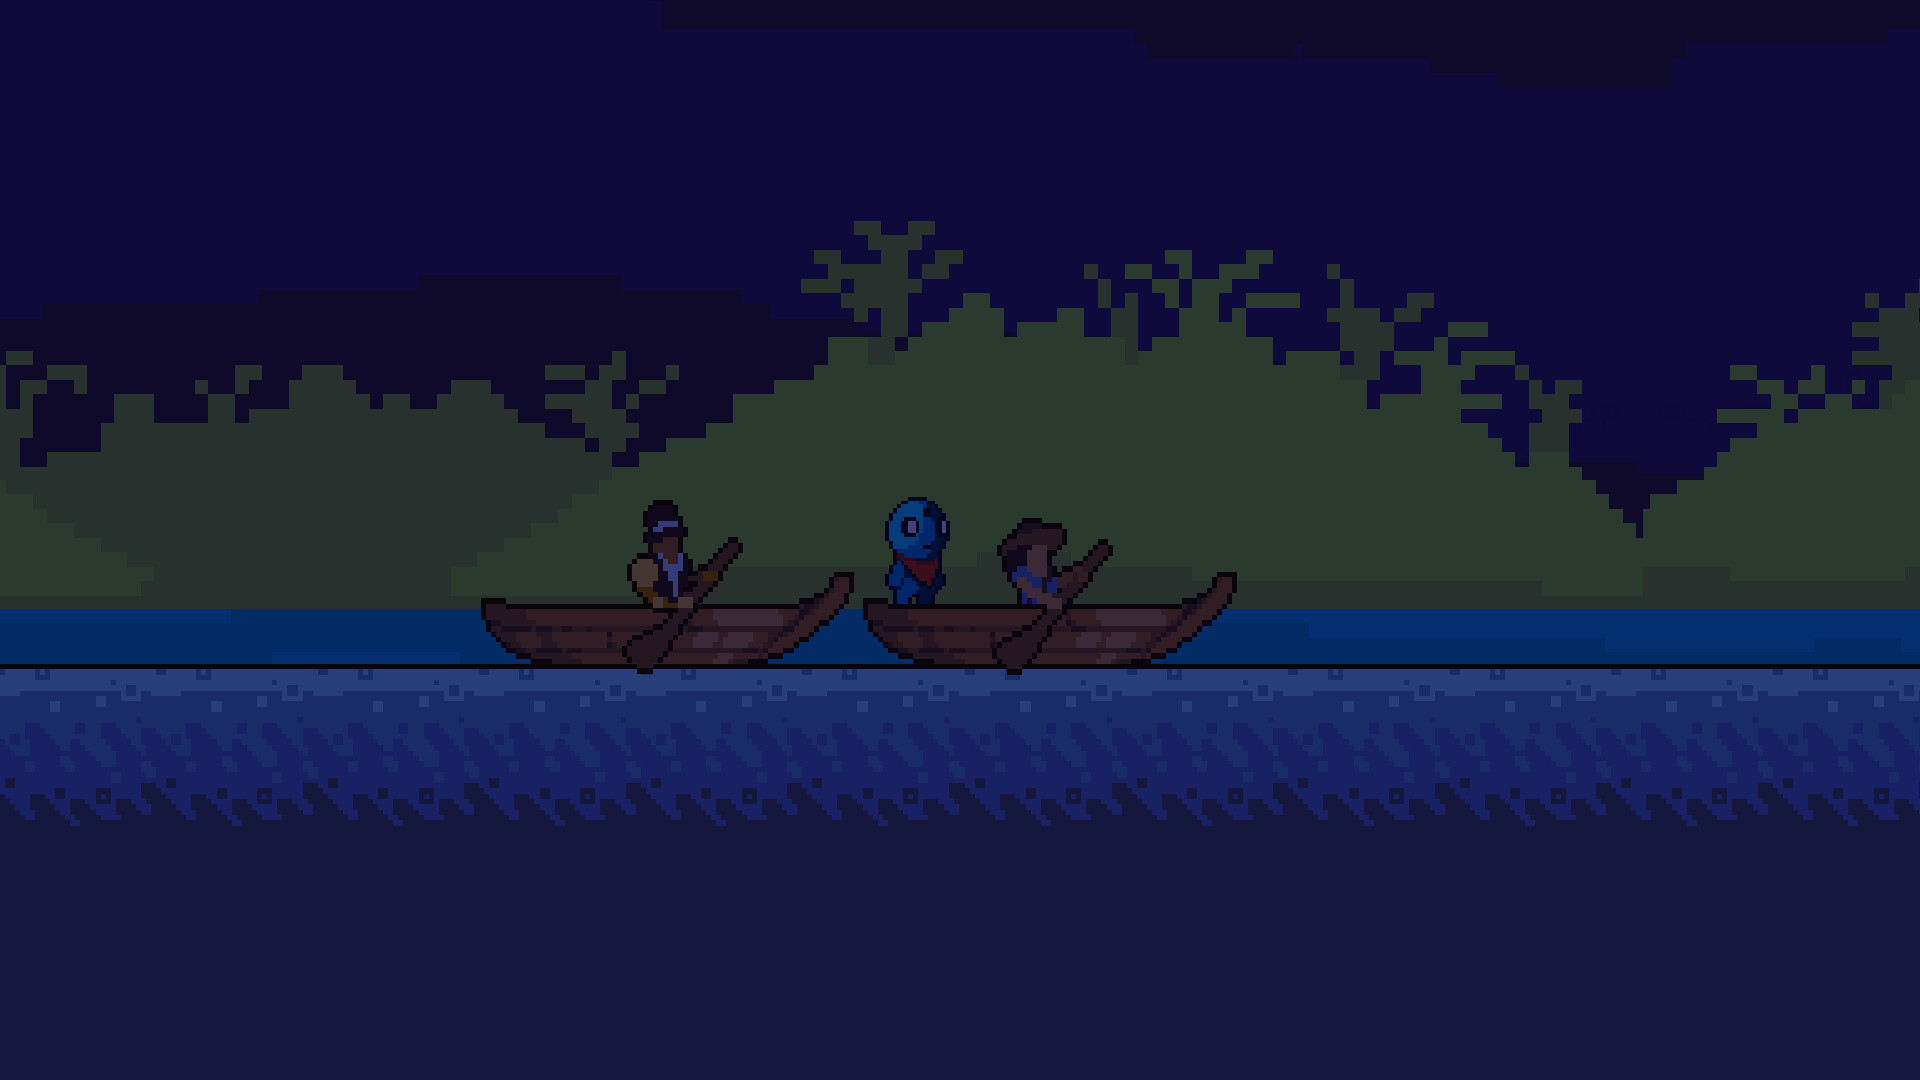 Idle Fishing on Steam